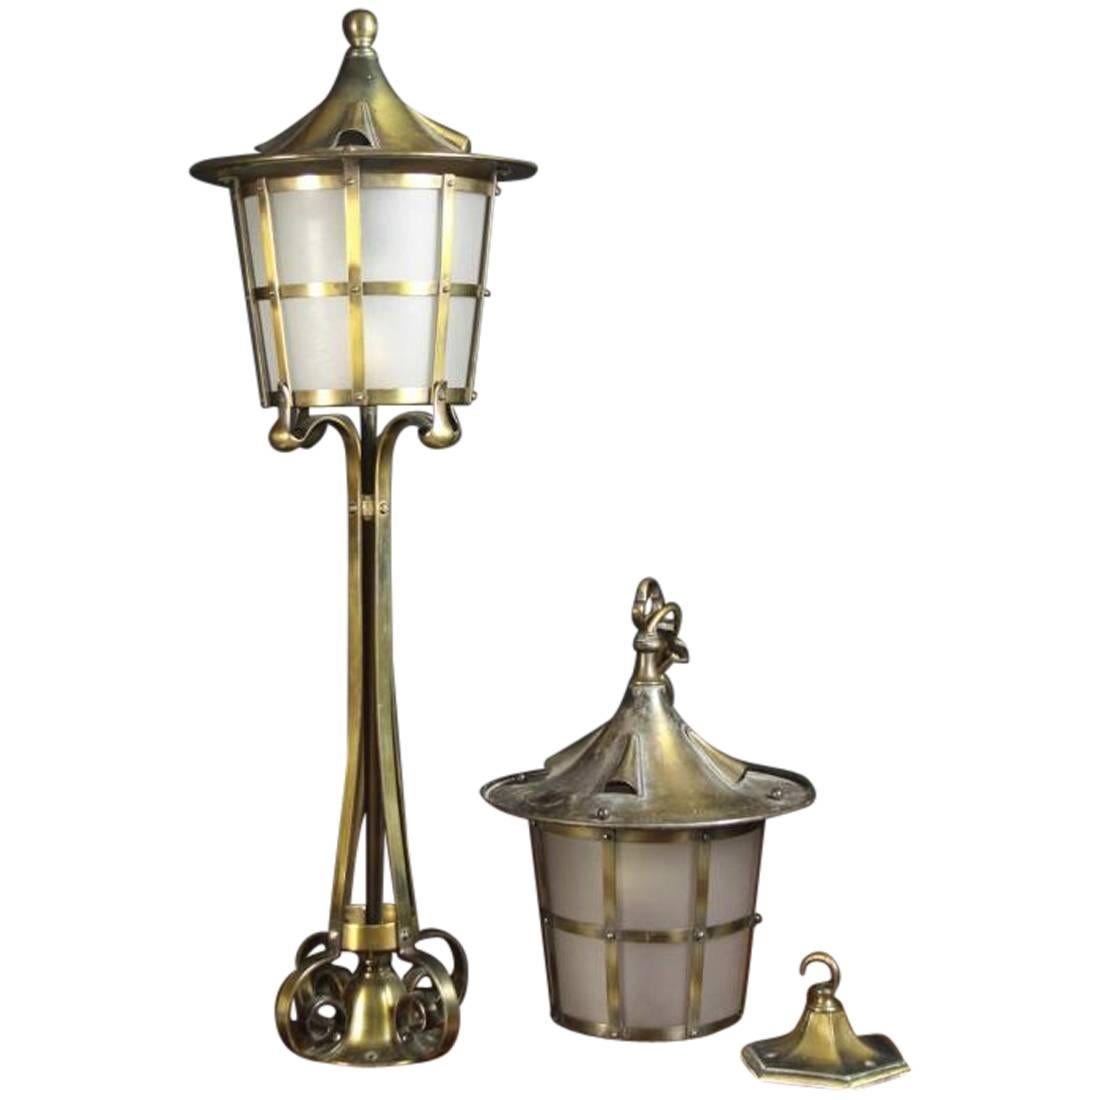 An Arts and Crafts Copper Stair Post Lantern with Matching Hall Lantern